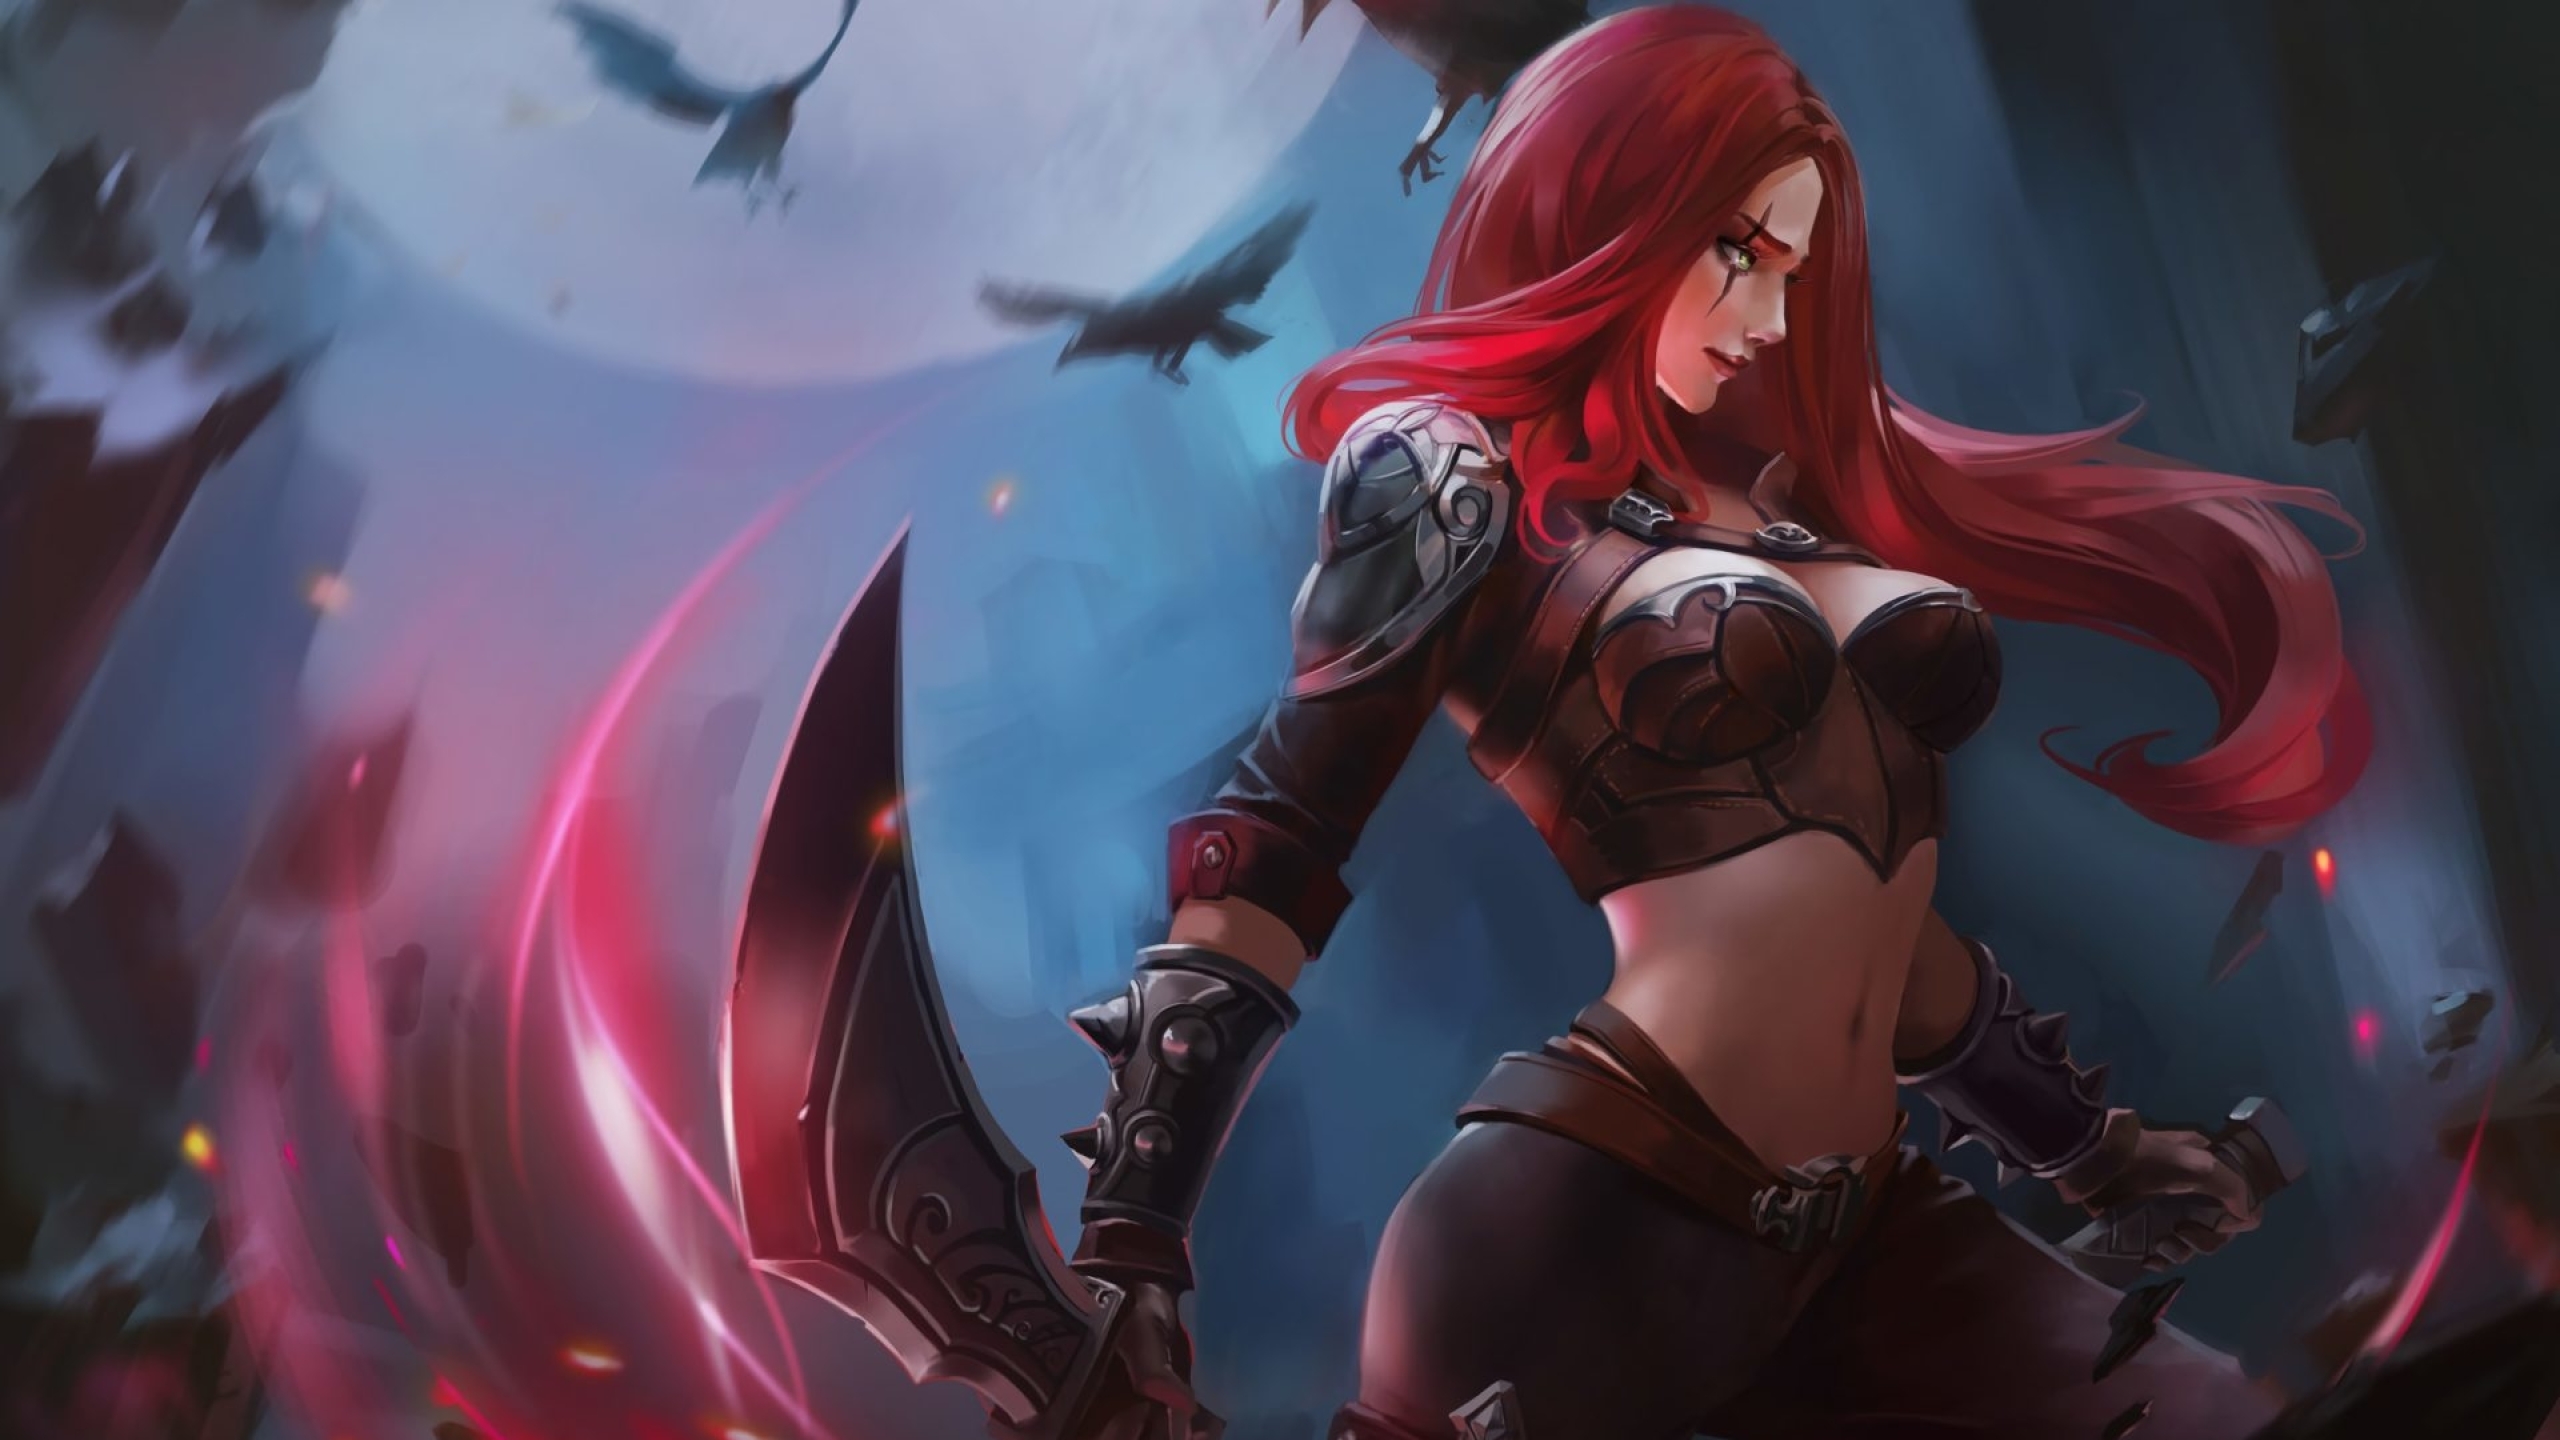 2560x1440 Katarina In League Of Legends 1440p Resolution Wallpaper Hd Games 4k Wallpapers Images Photos And Background